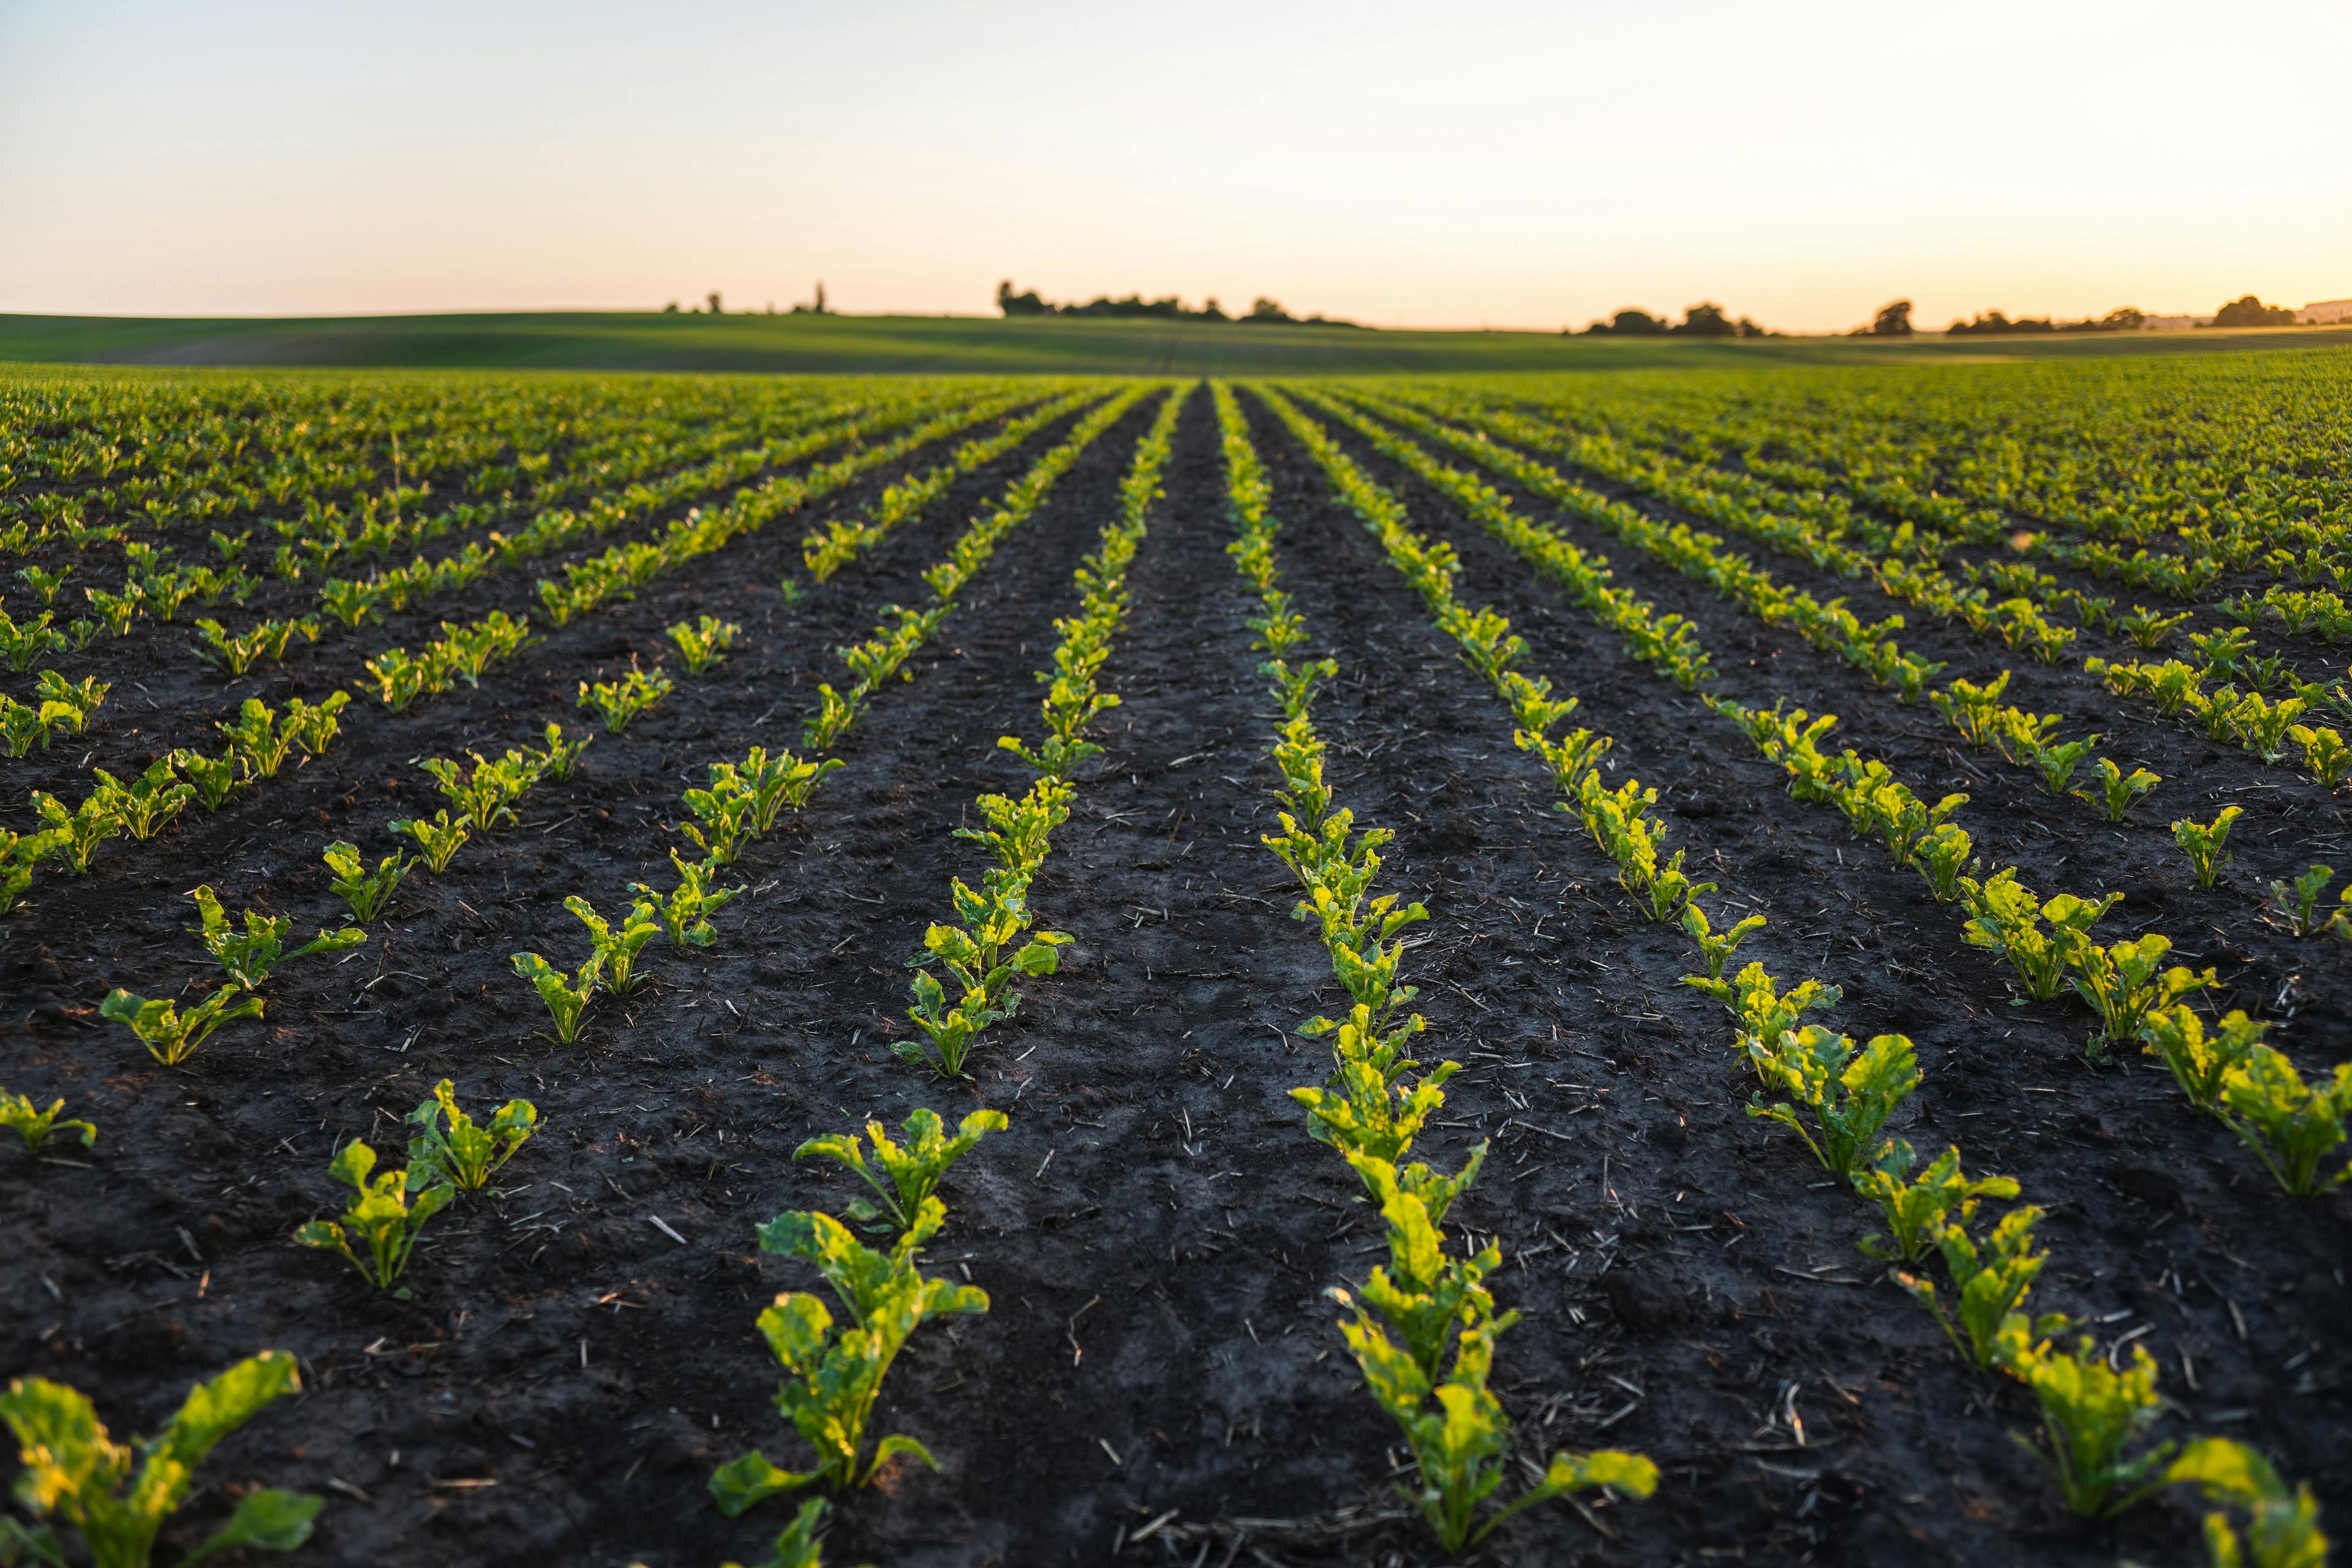 Landscape rows of young beatroot plants. Young beat sprouts during the period of active growth. Sugar beat plant in cultivated agricultural field. Agriculture process. | Image Credit: © Volodymyr - stock.adobe.com. 